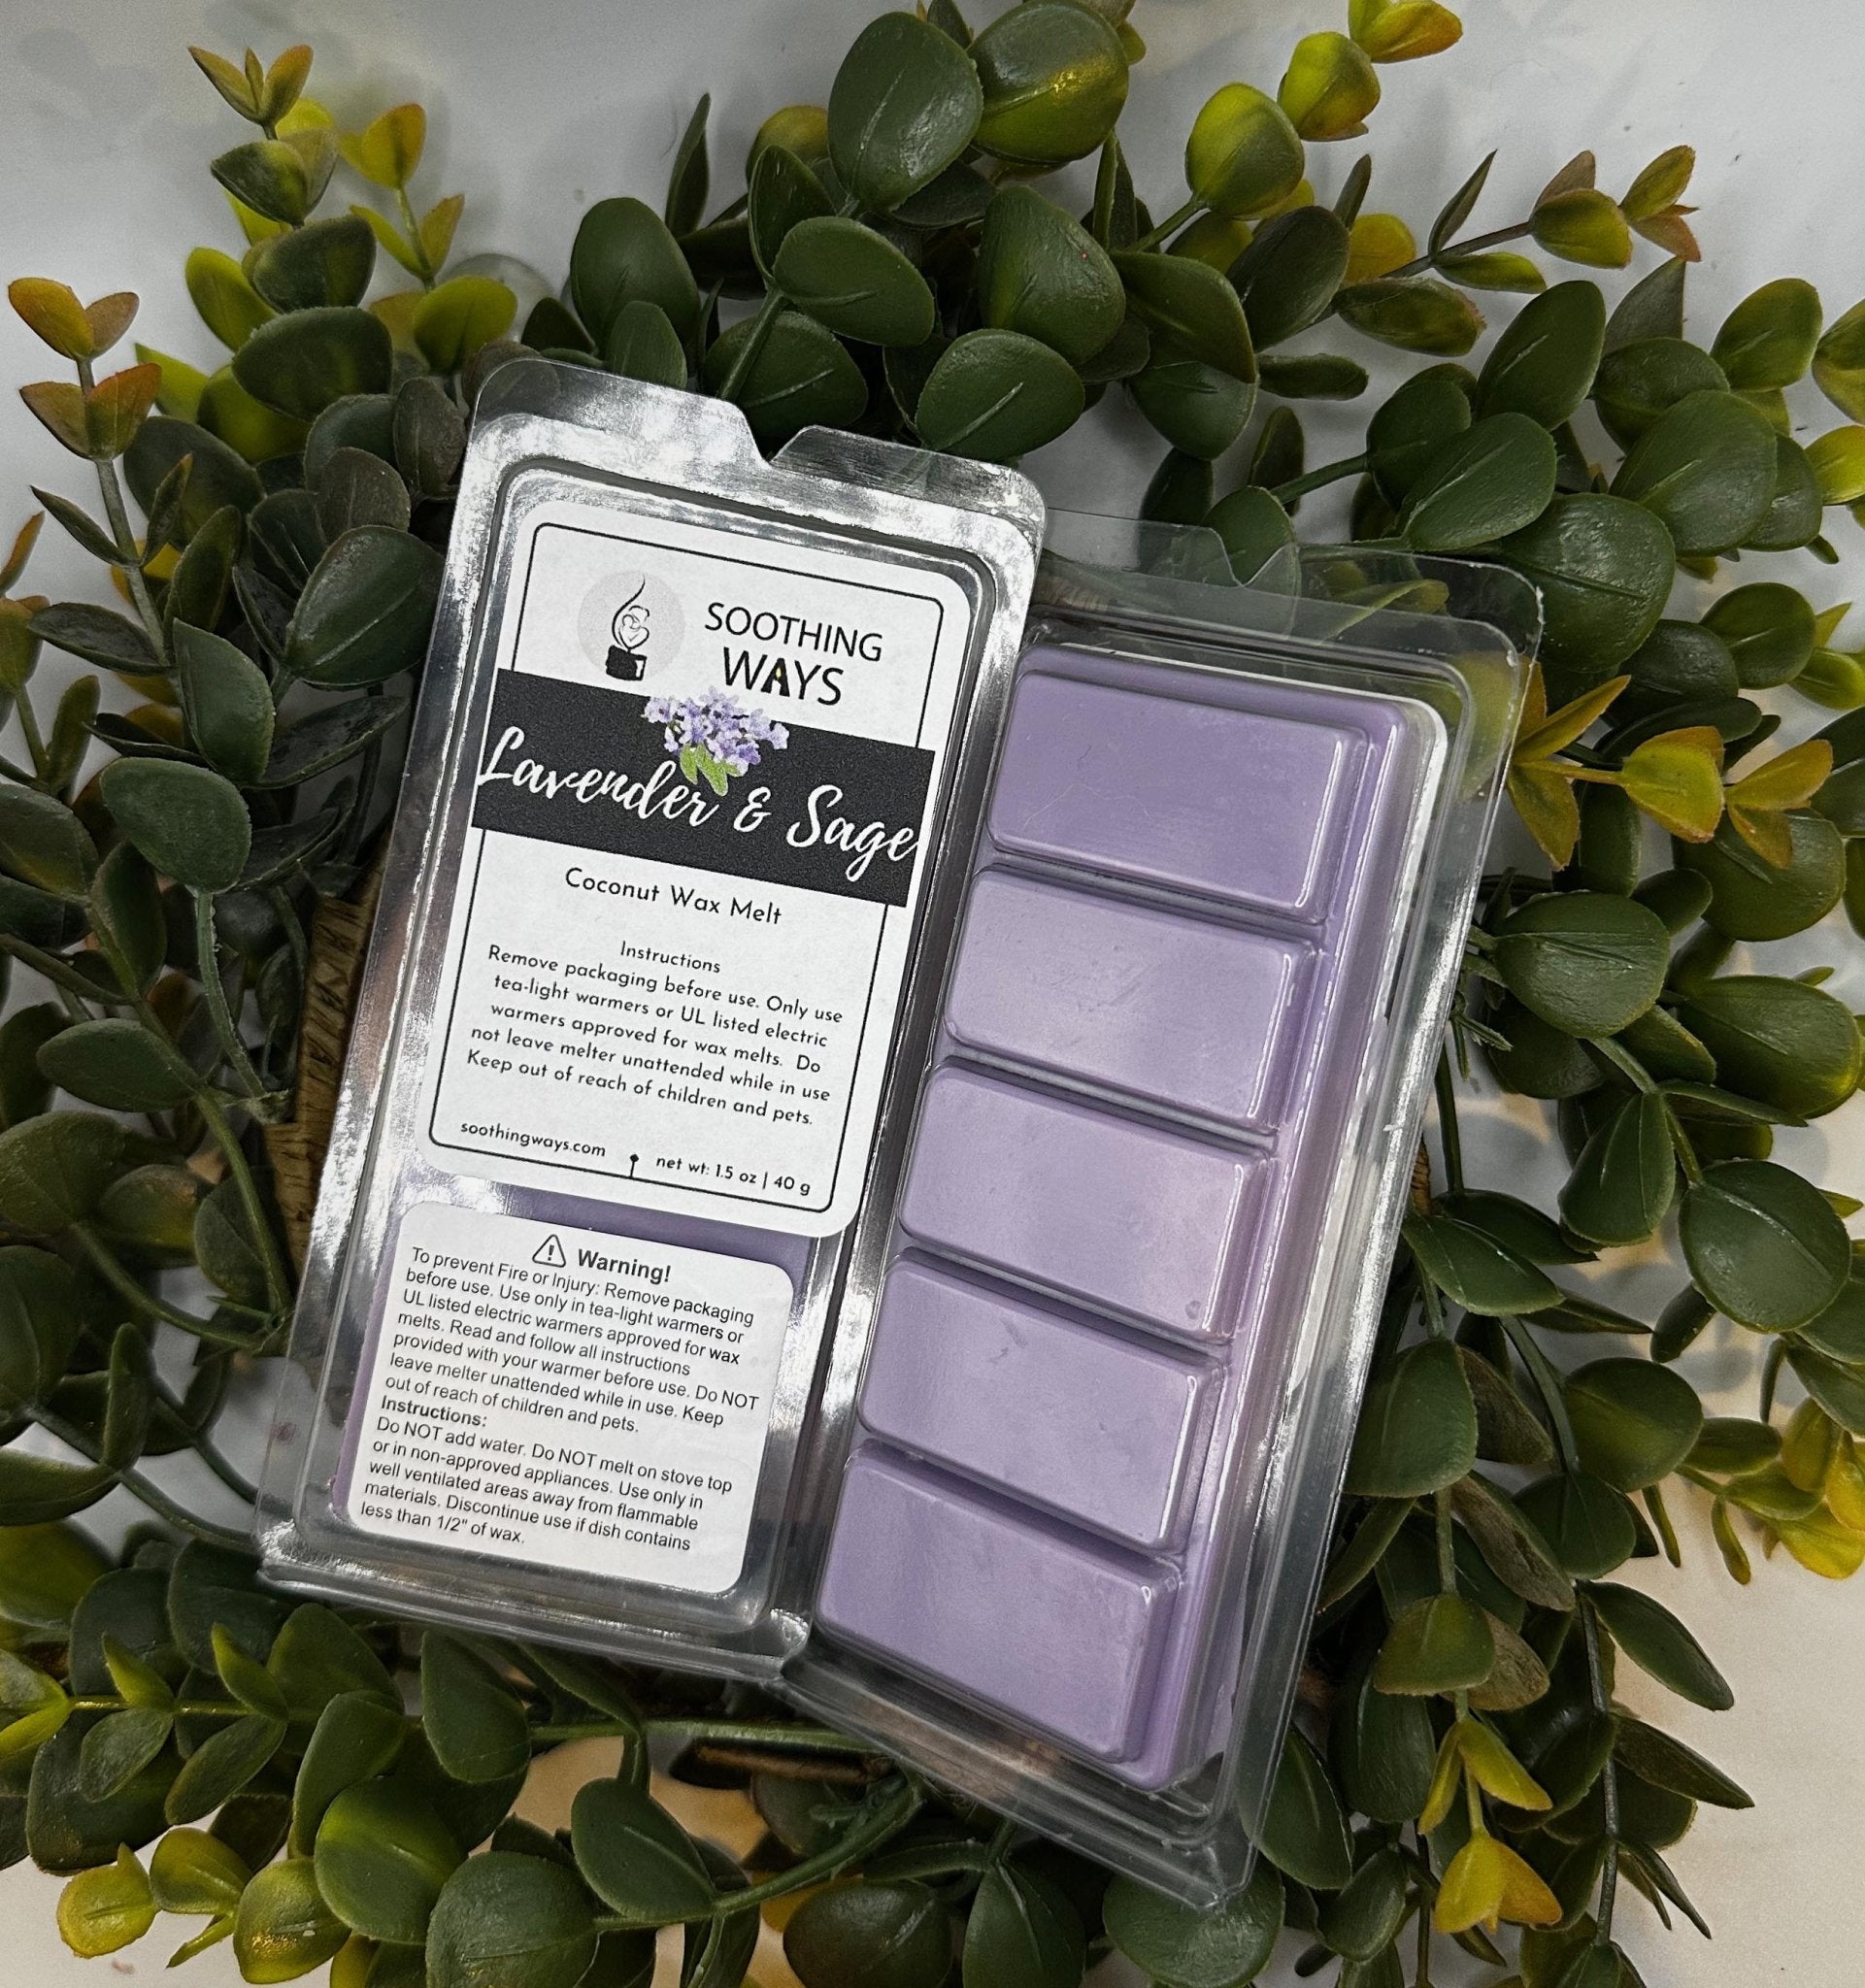 Lavender and Sage -Wax melt - Soothing Ways